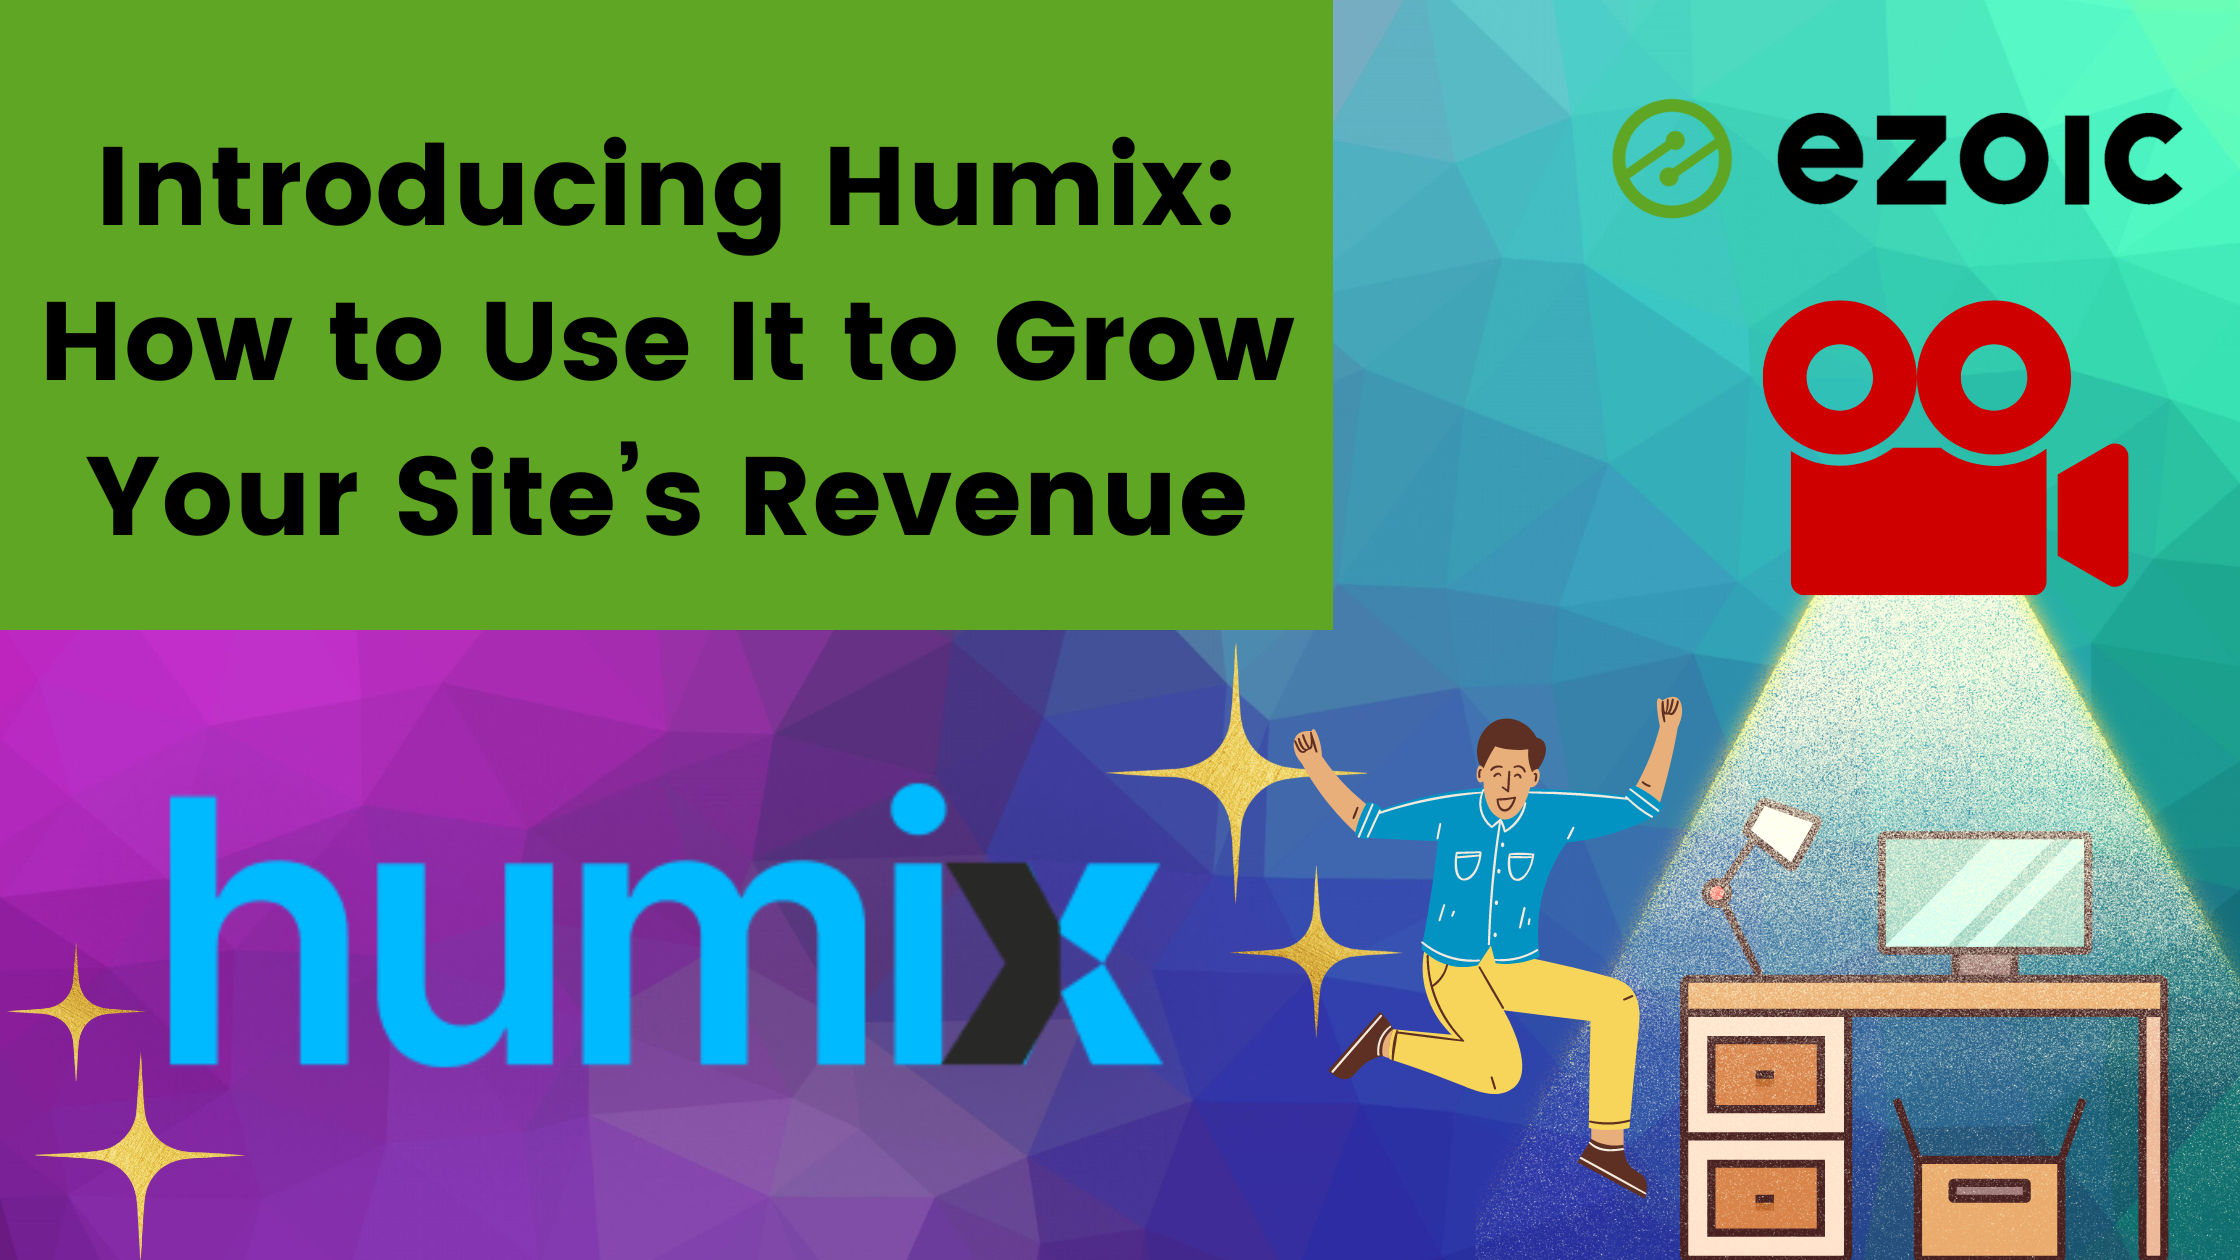 Introducing Humix: How to Use It to Grow Your Site’s Revenue